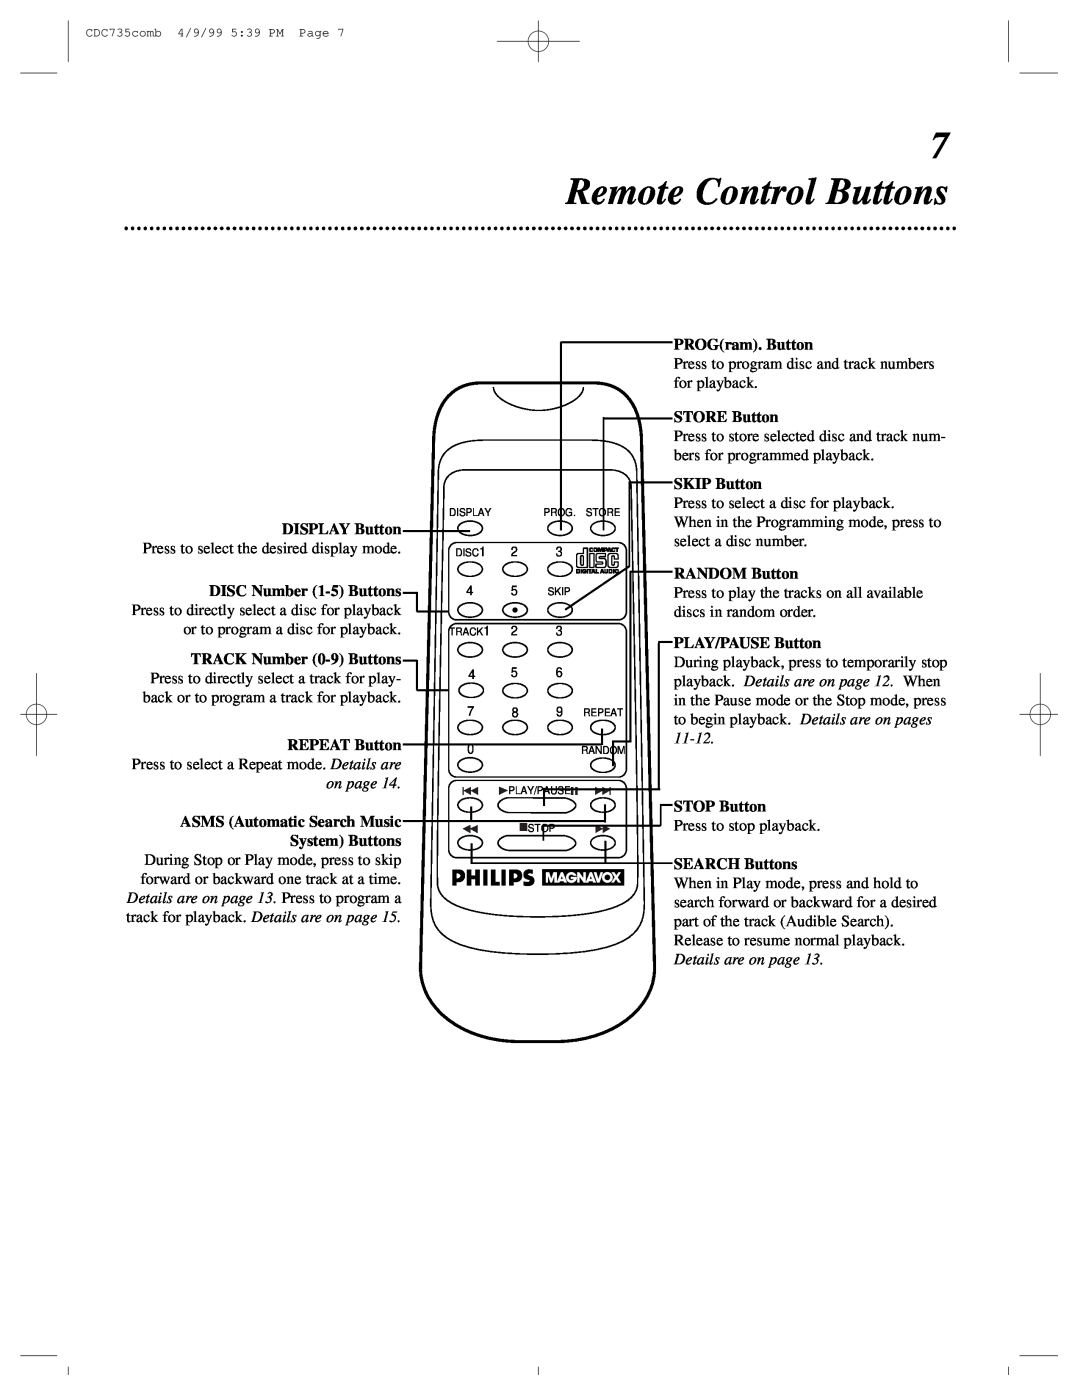 Philips CDC735 owner manual Remote Control Buttons 